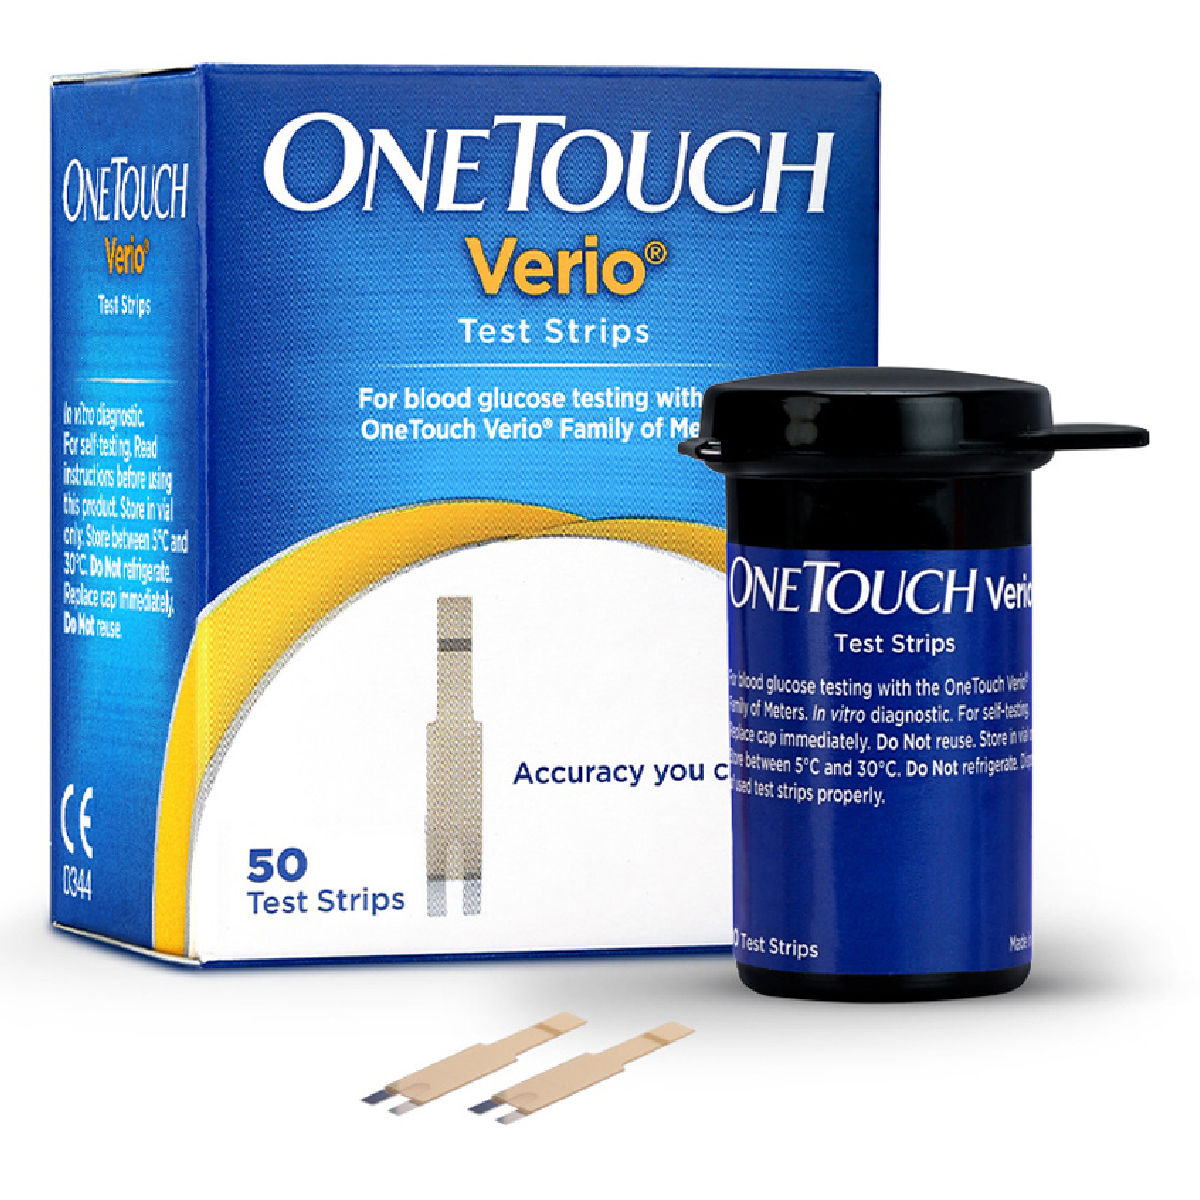 OneTouch Verio Test Strips, 50 Count, Pack of 1 